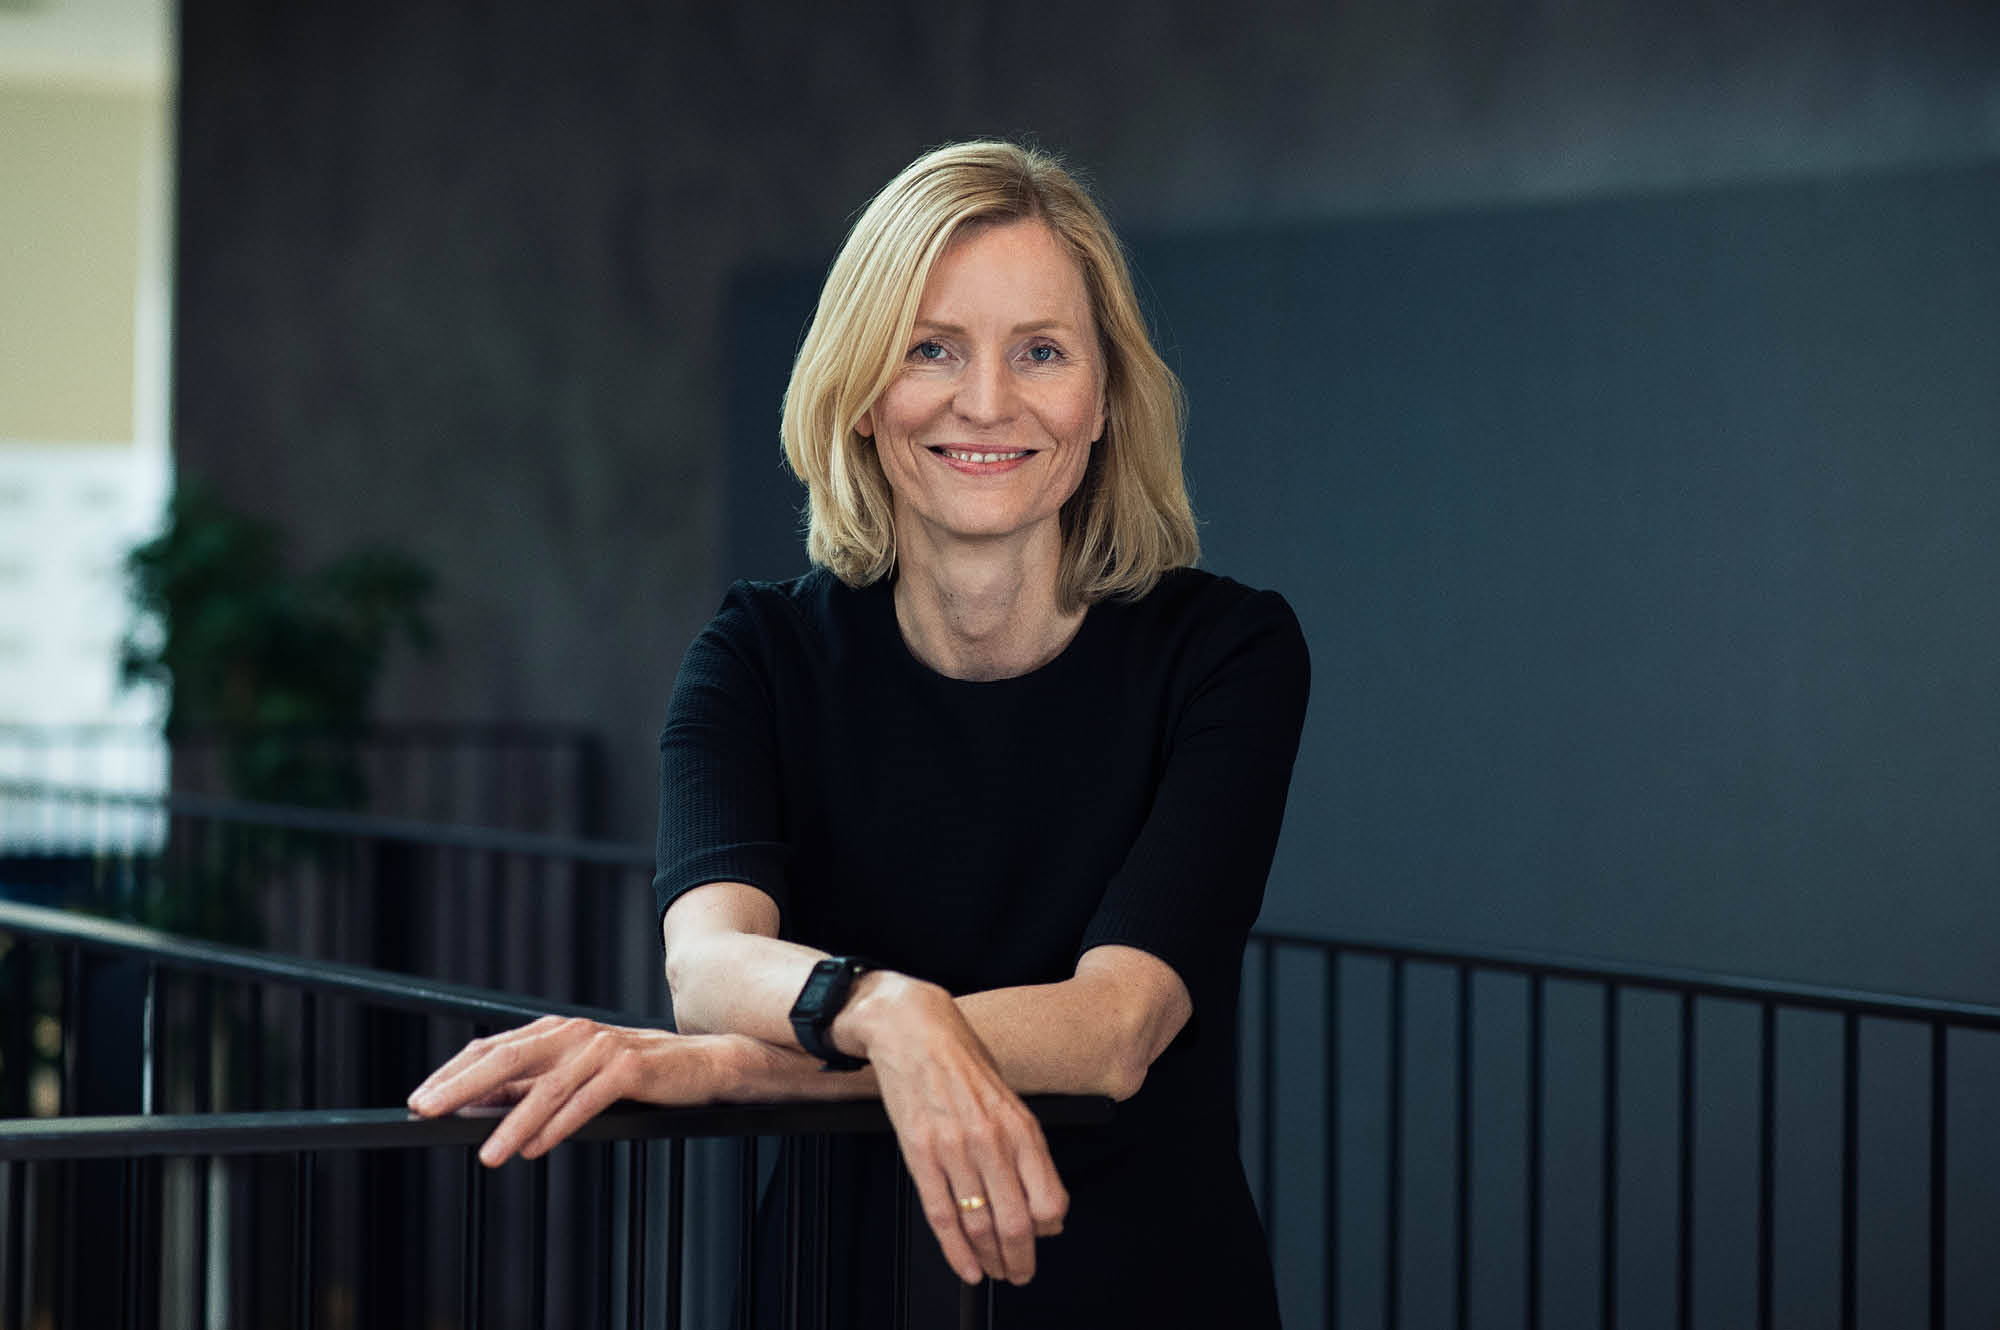 The 49-year-old mother of two, who became governor of the Danish central bank in November 2020